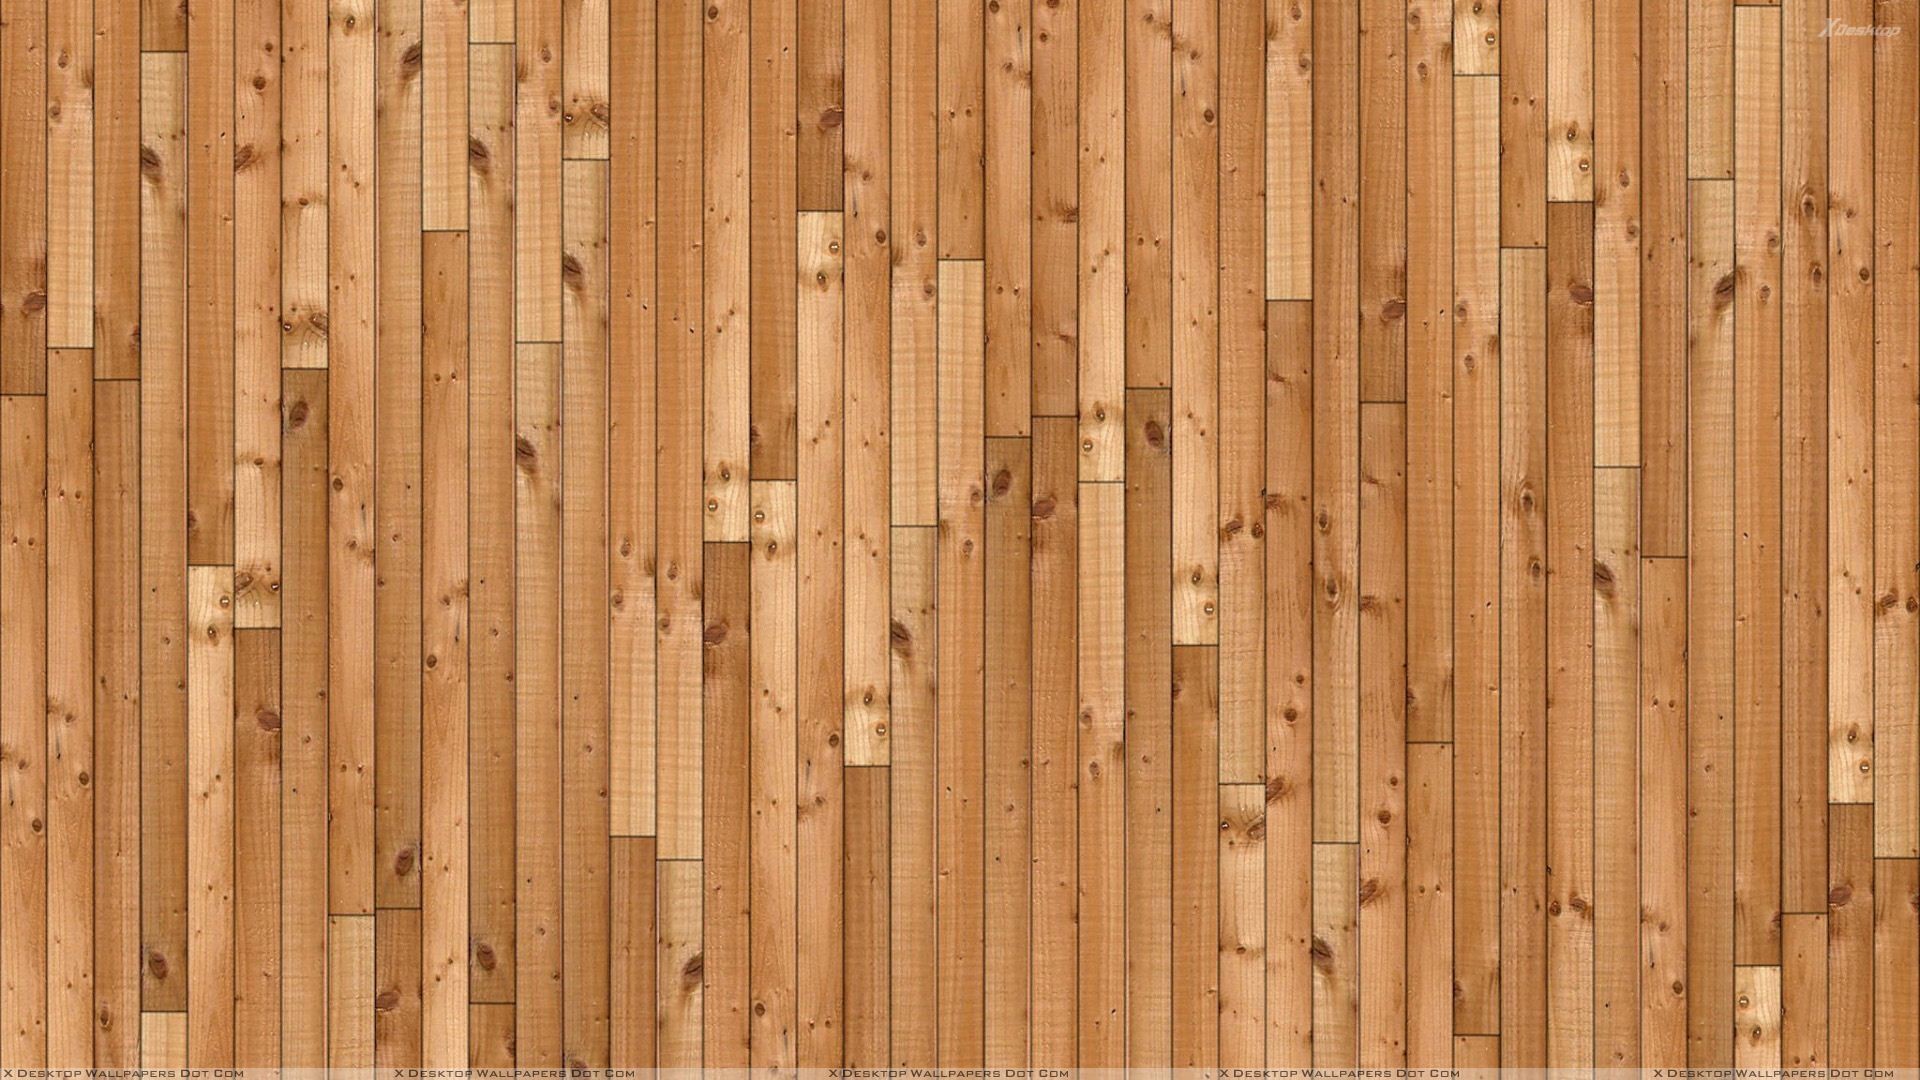 1920x1080 ... Rustic Hardwood Background And Wooden Stipe Background ...